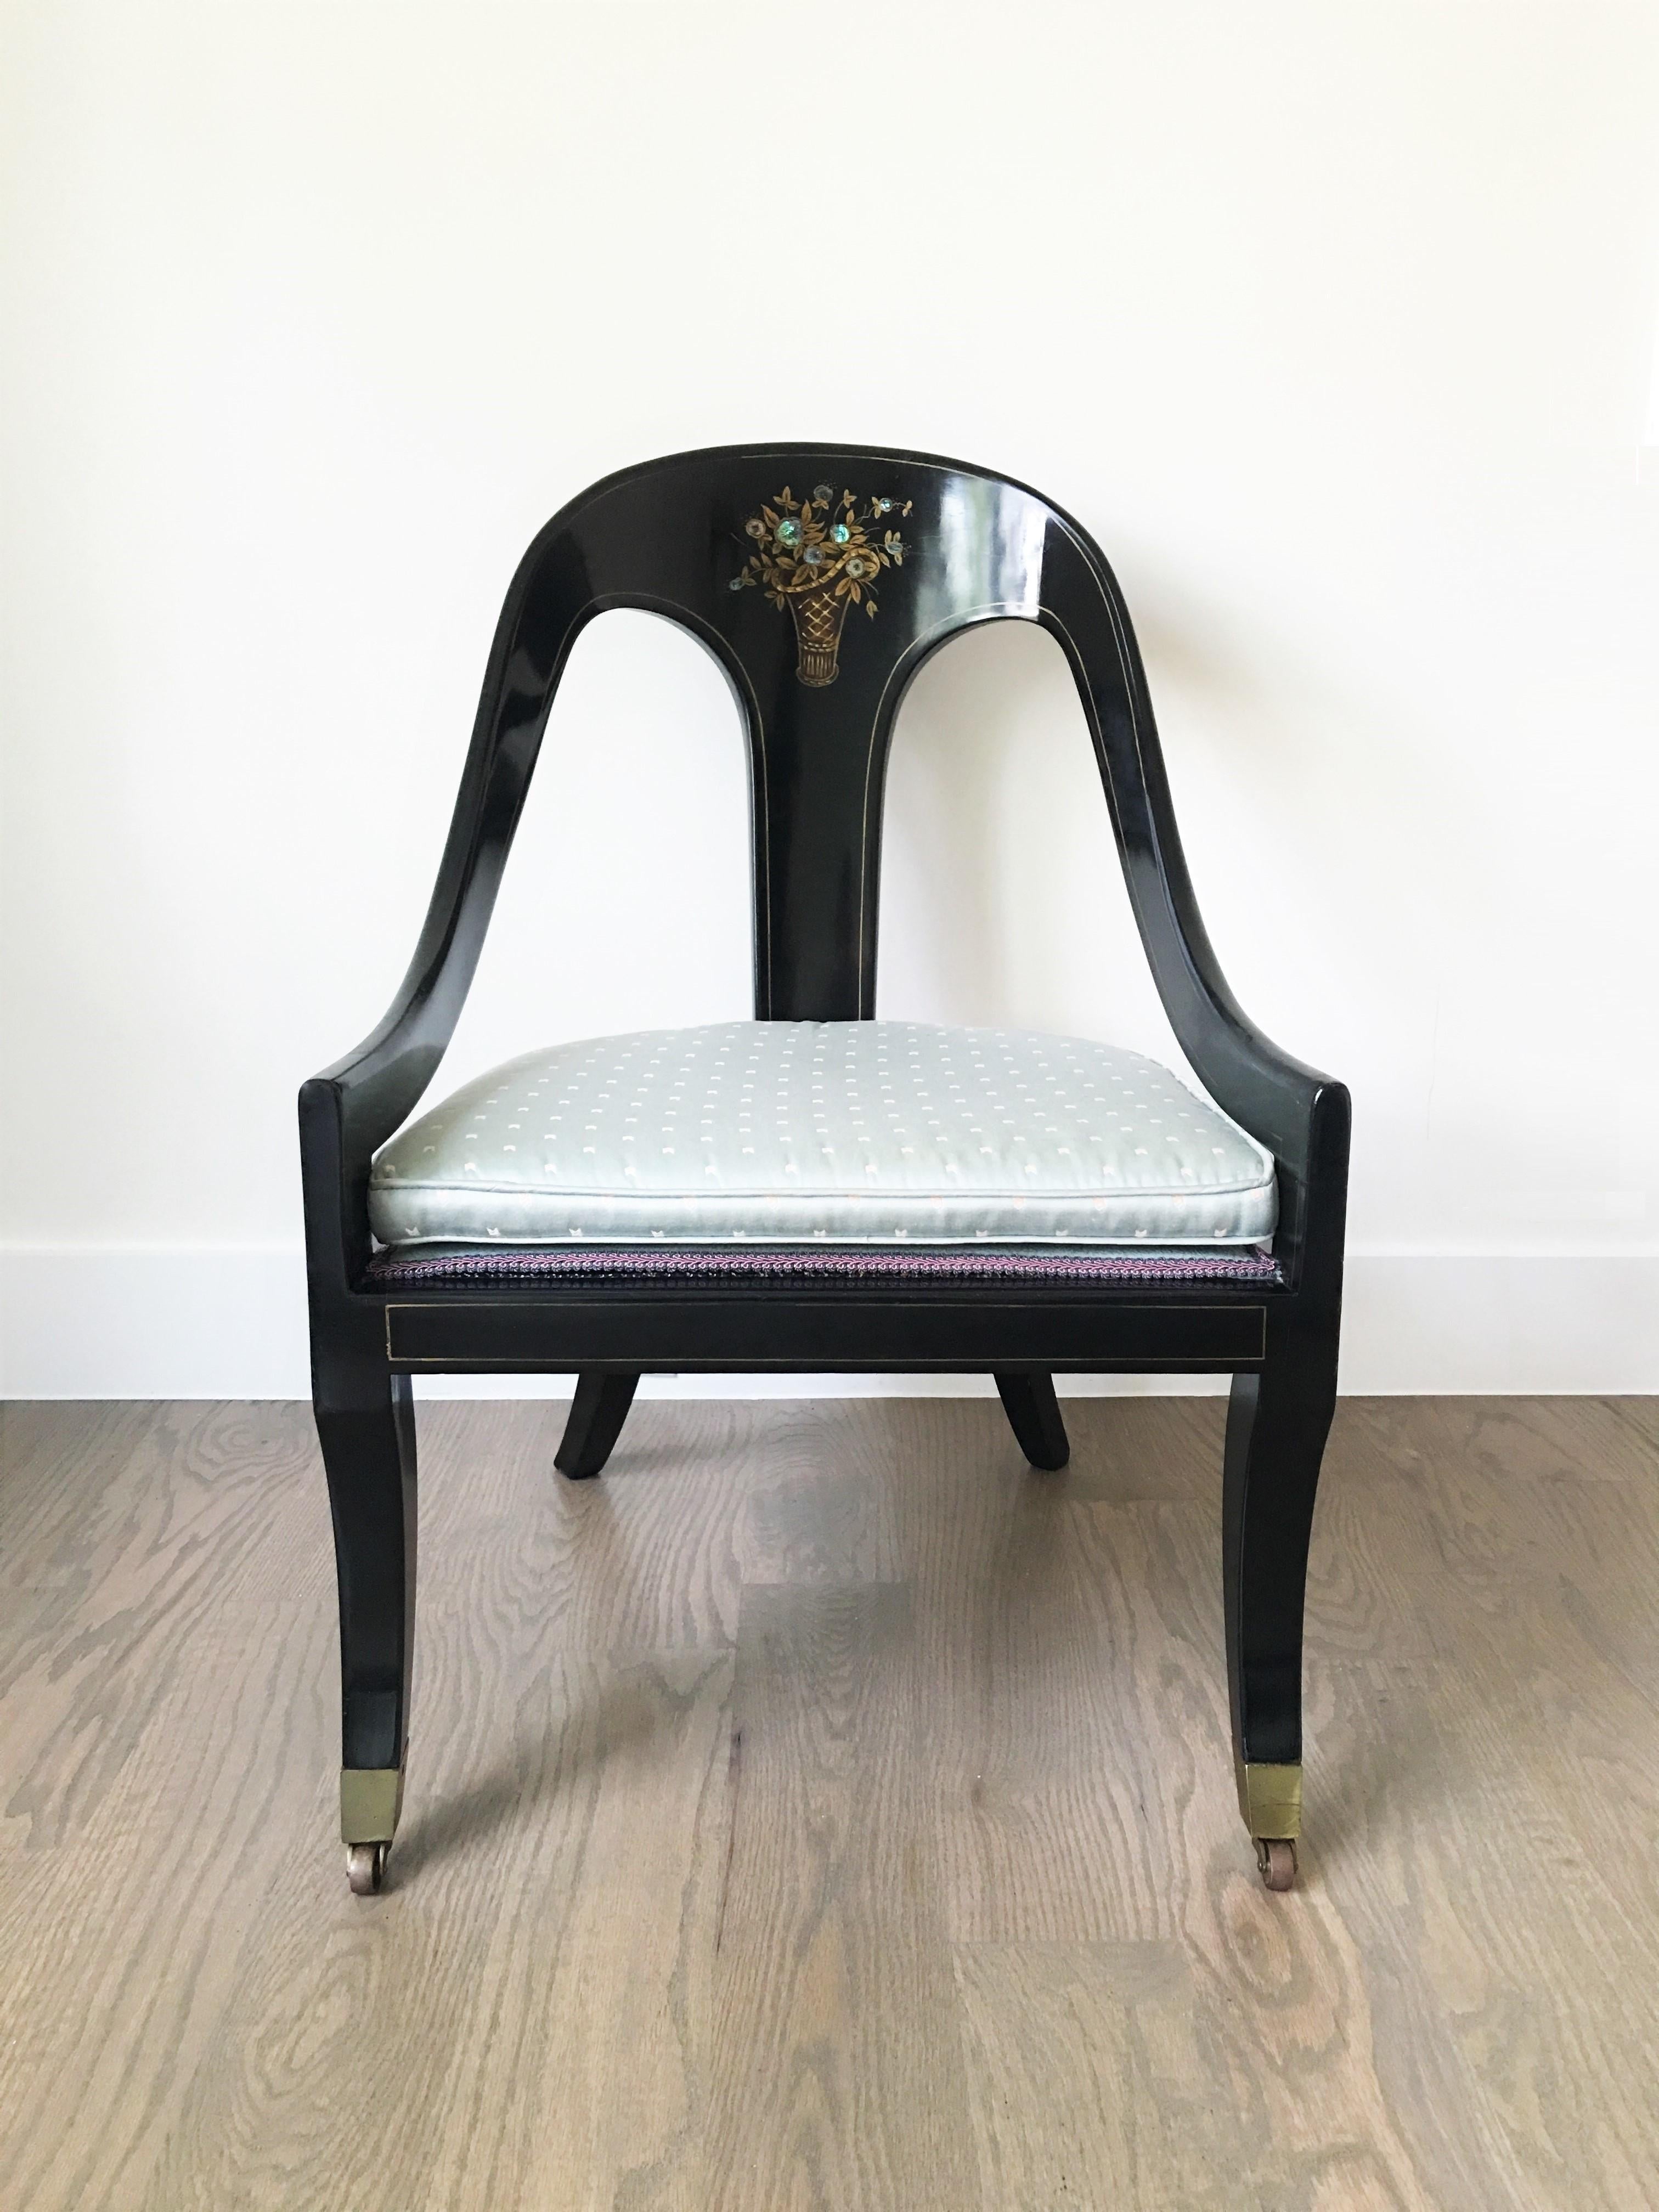 Pair of Regency style spoon-back chairs. The chairs have black lacquered frames featuring an arched crest above a vertical splat with a floral mother of pearl inlay pattern flanked by down swept arms. Hand decorated with gilt detailing, upholstered